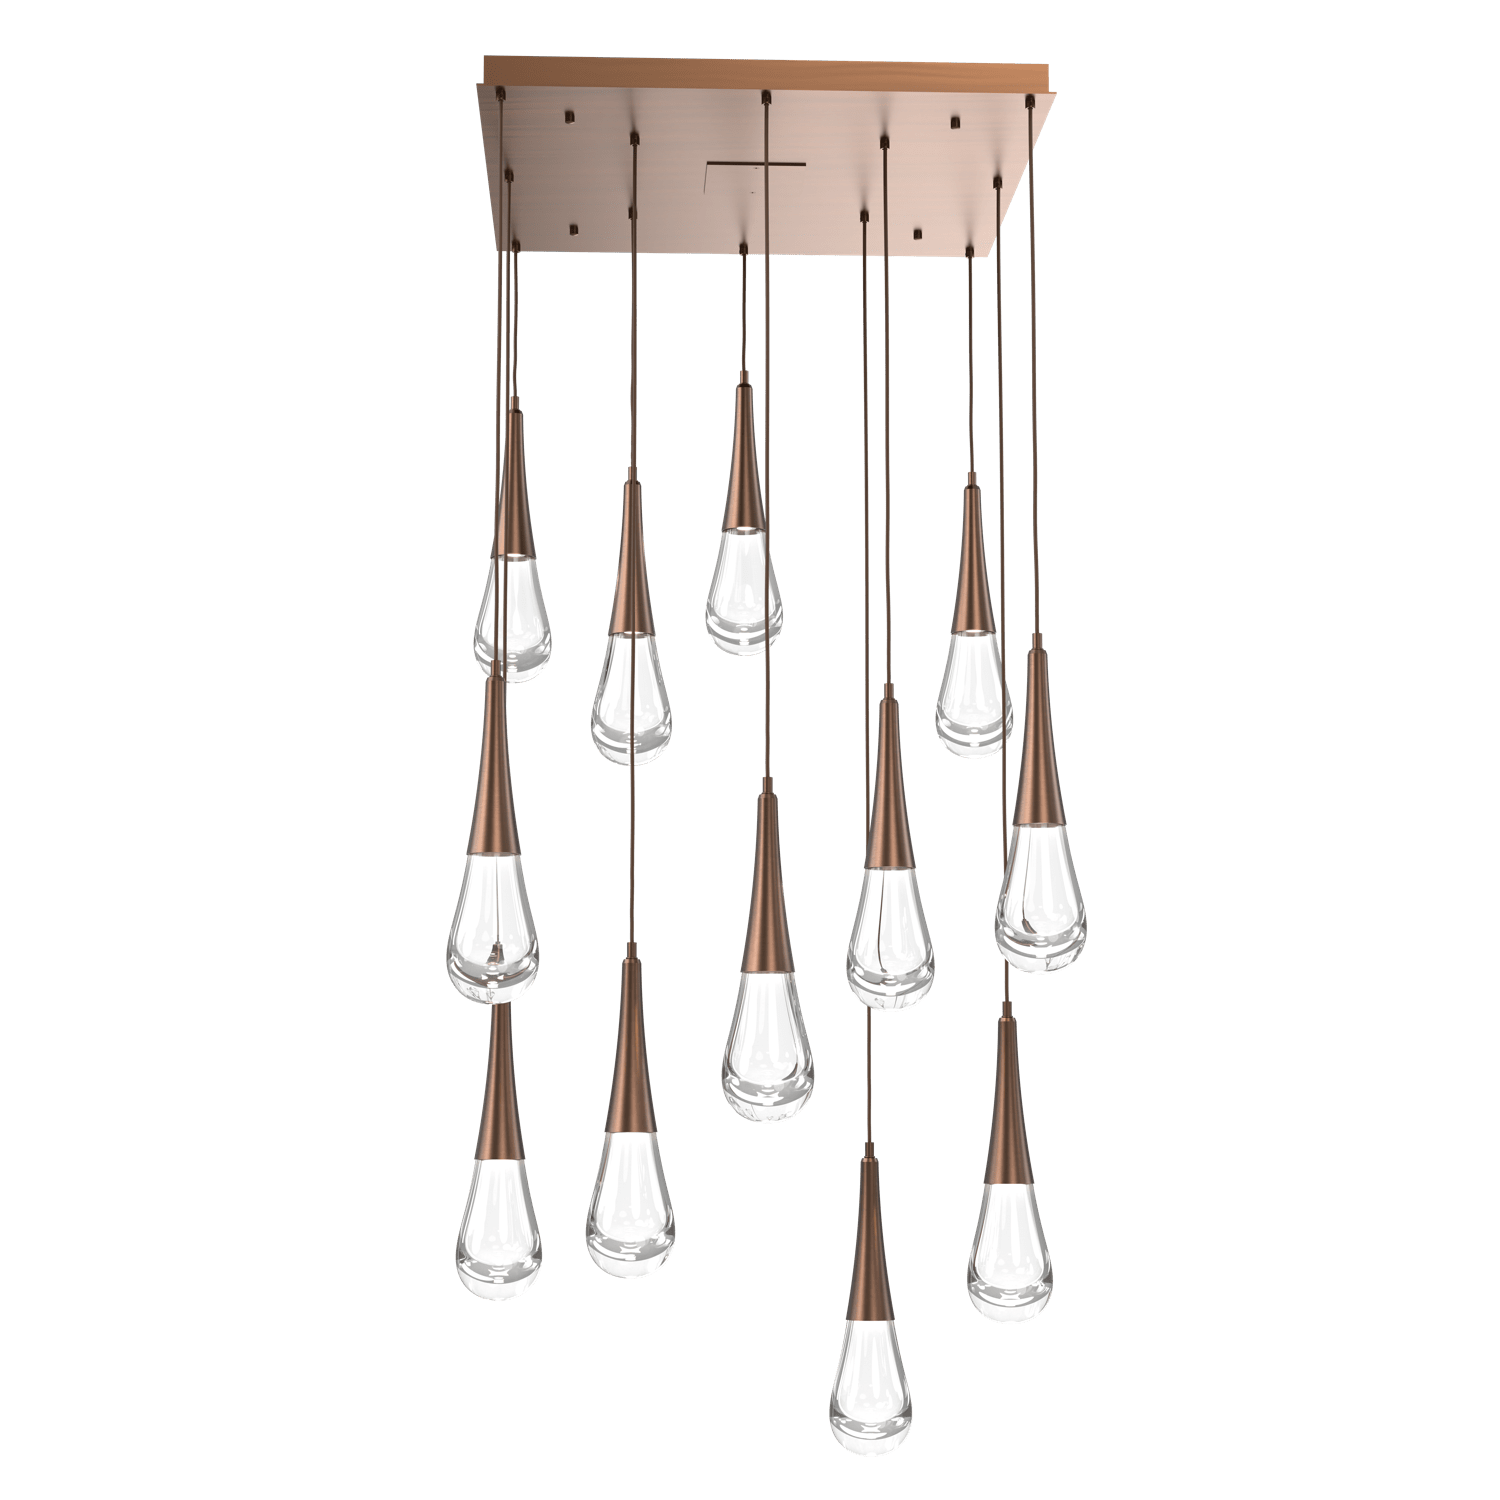 CHB0078-12-RB-Hammerton-Studio-Raindrop-12-light-square-pendant-chandelier-with-oil-rubbed-bronze-finish-and-clear-blown-glass-shades-and-LED-lamping